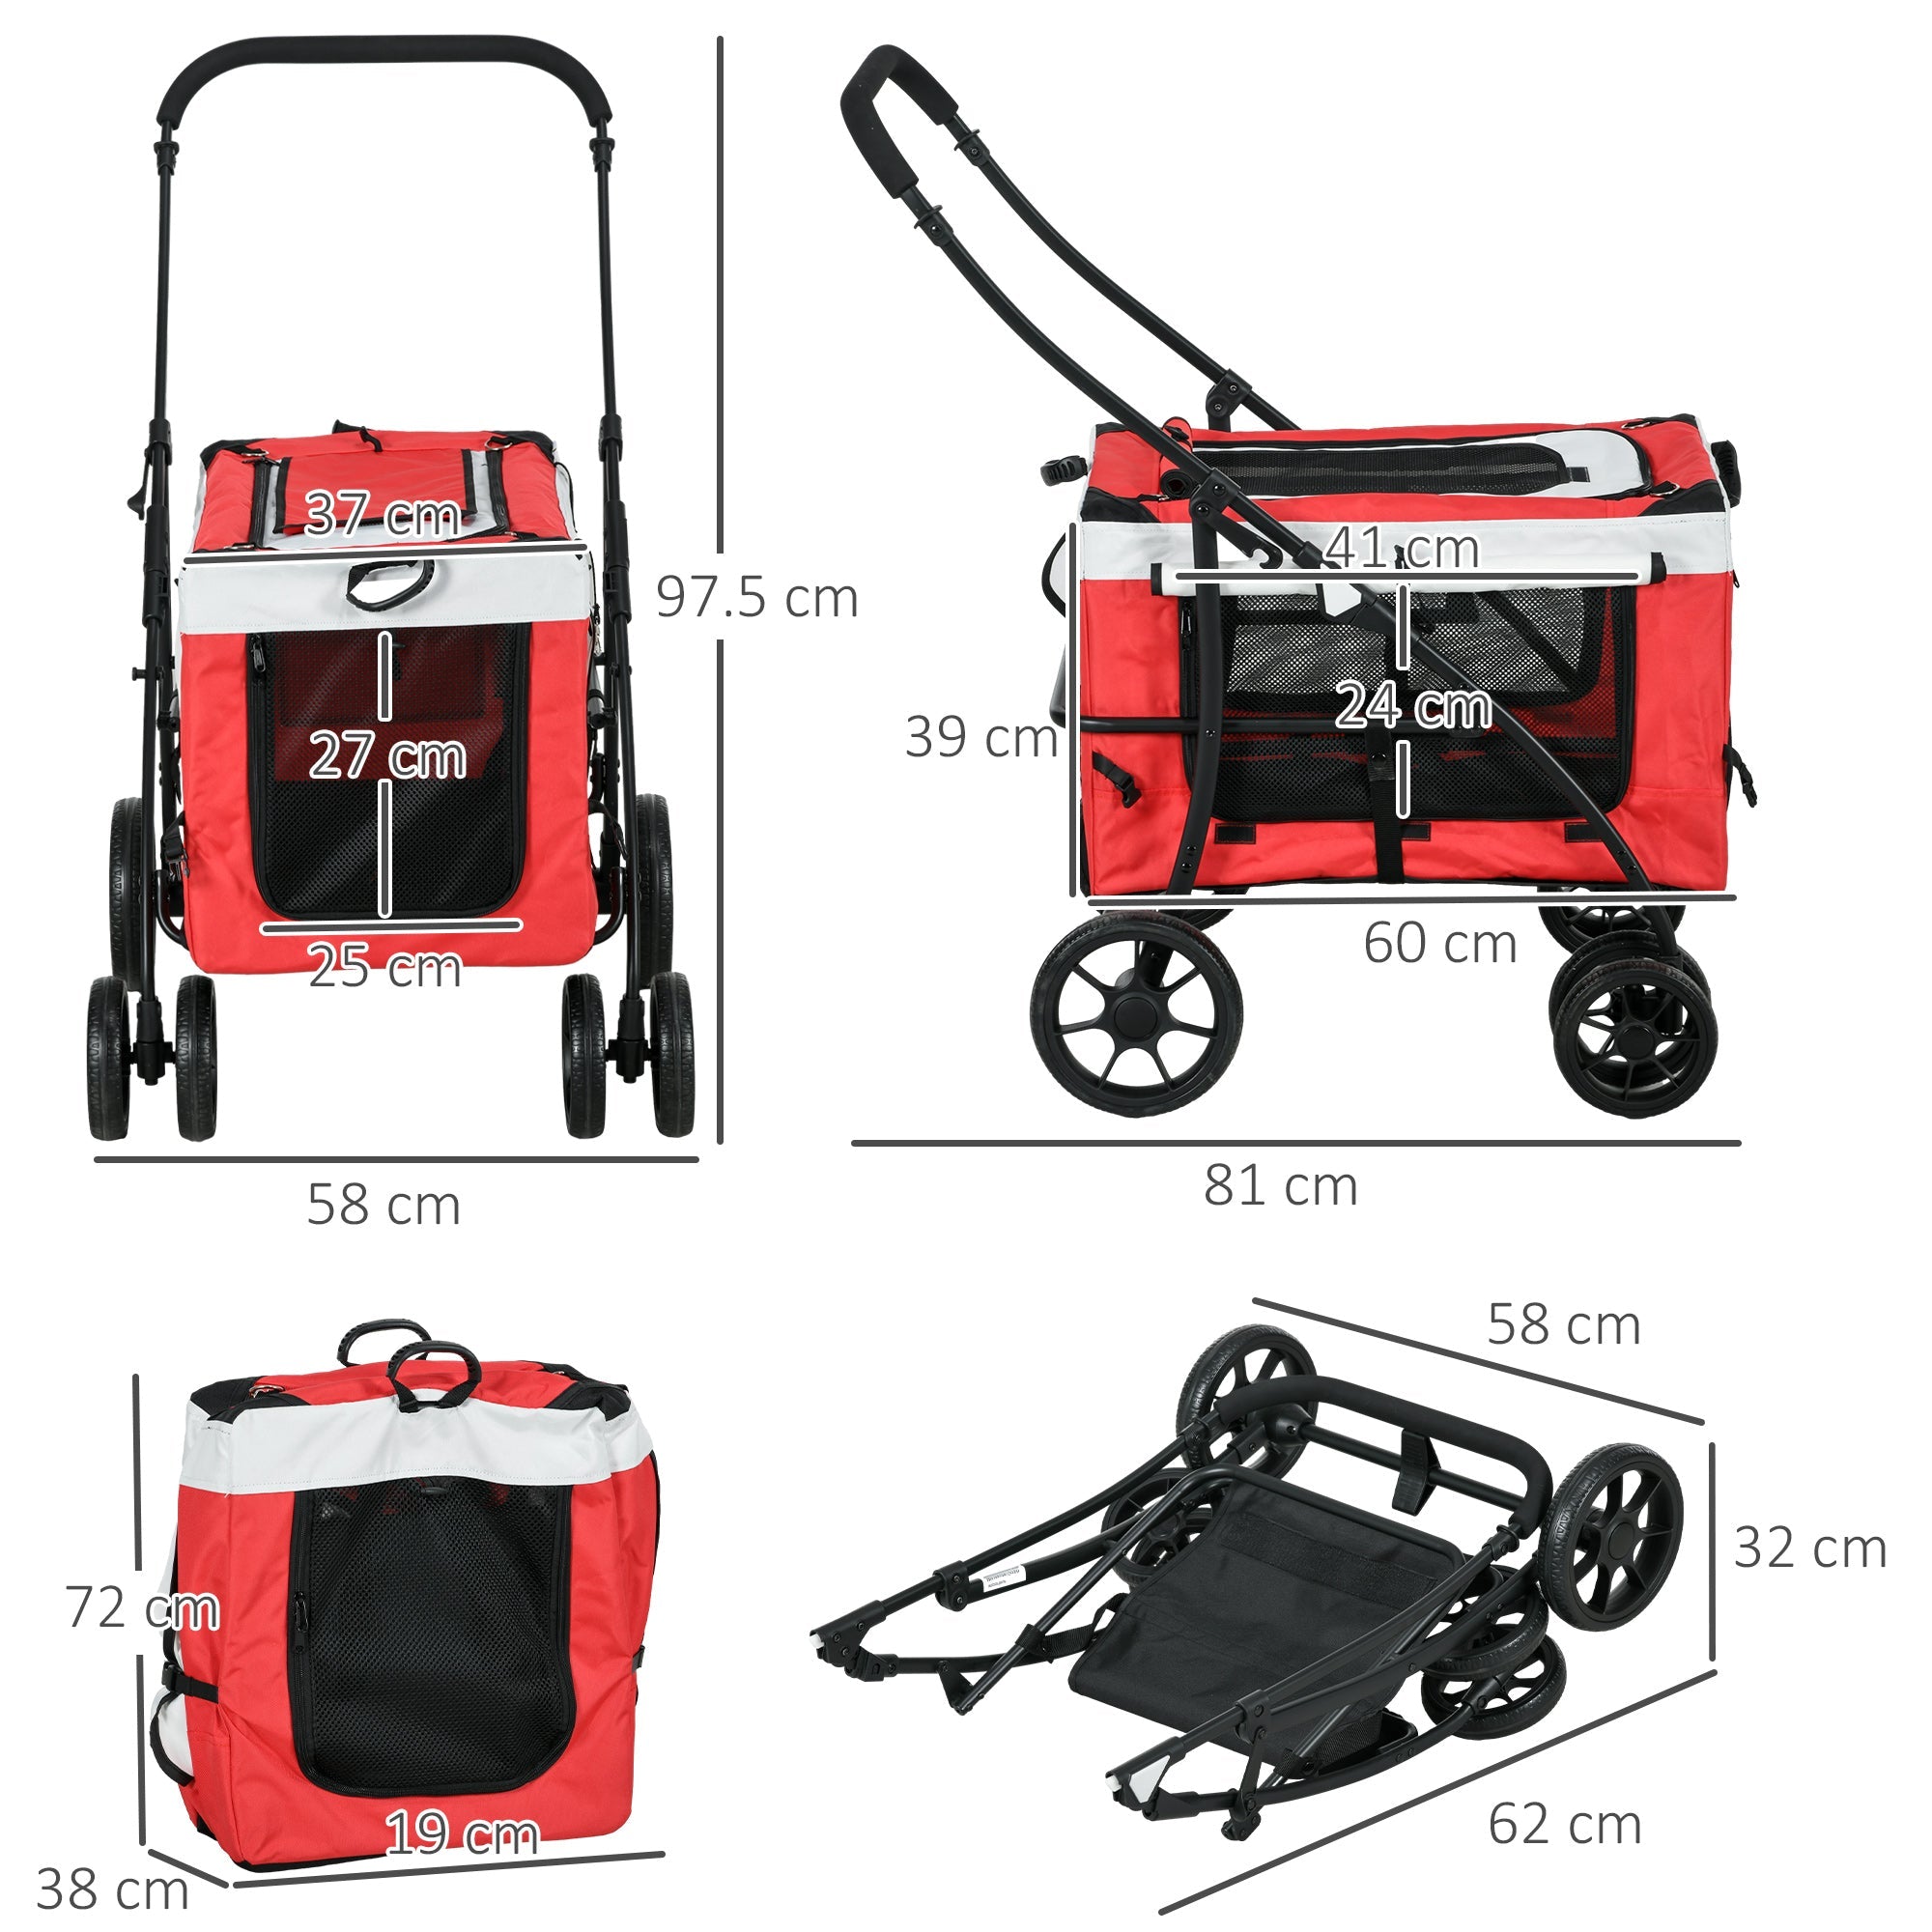 Foldable Dog Stroller, Pet Travel Crate, with Detachable Carrier, Soft Padding, for Mini, Small Dogs - Red-2